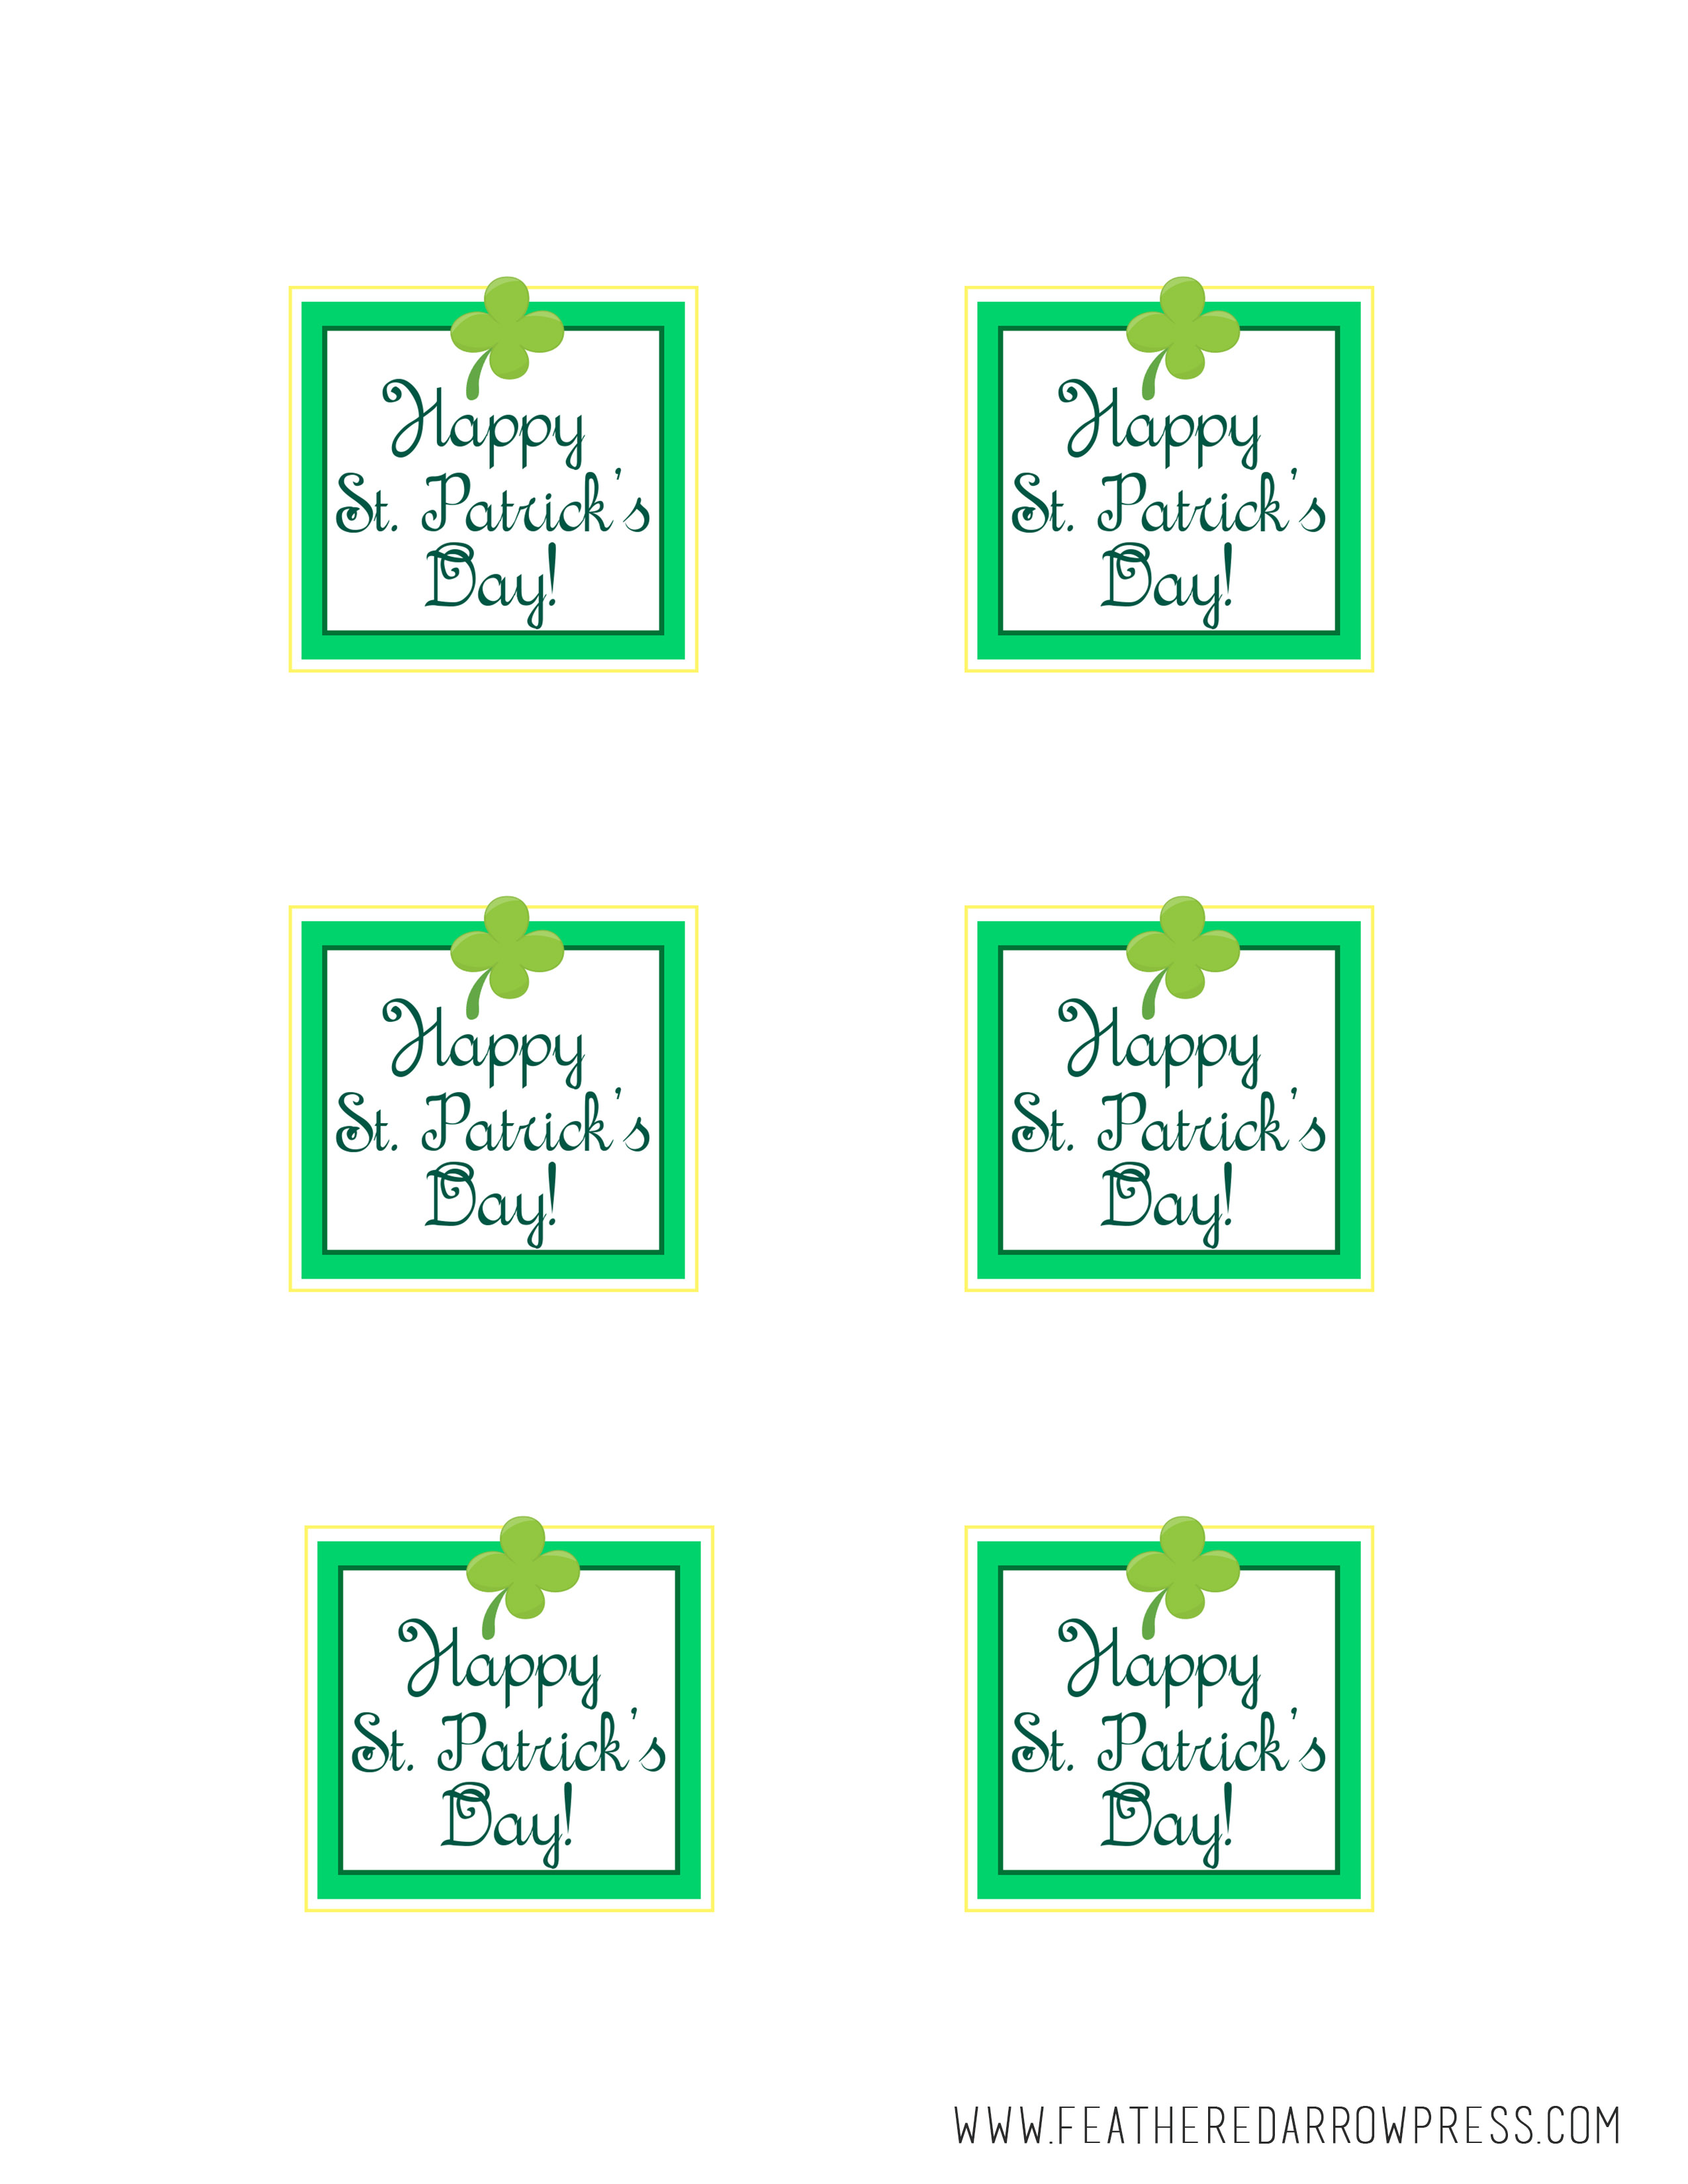 Free Happy St Patrick S Day Printable Tags A Night Owl Blog